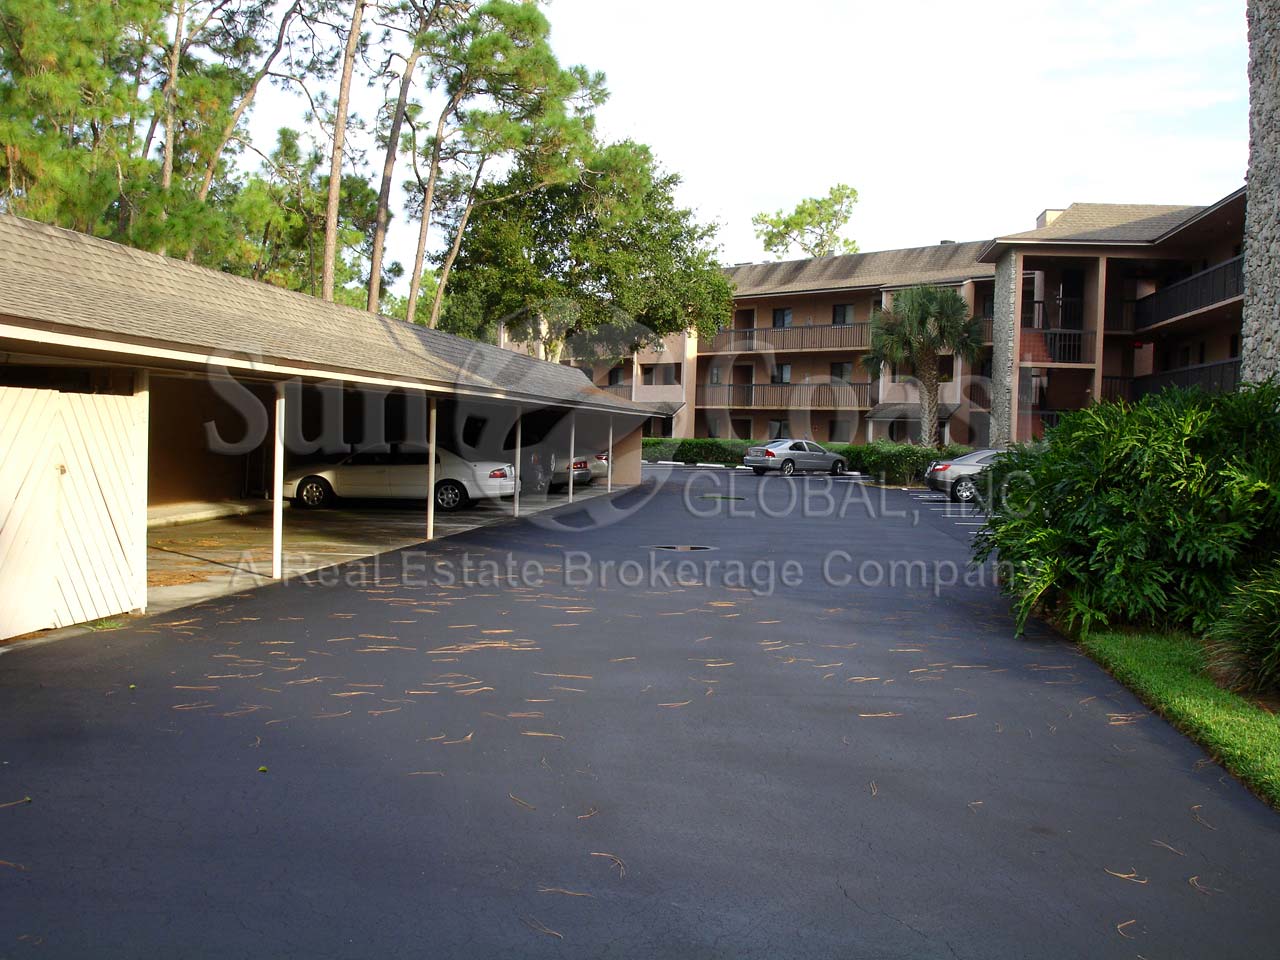 Augusta Court Condominiums with Covered Parking and Storage